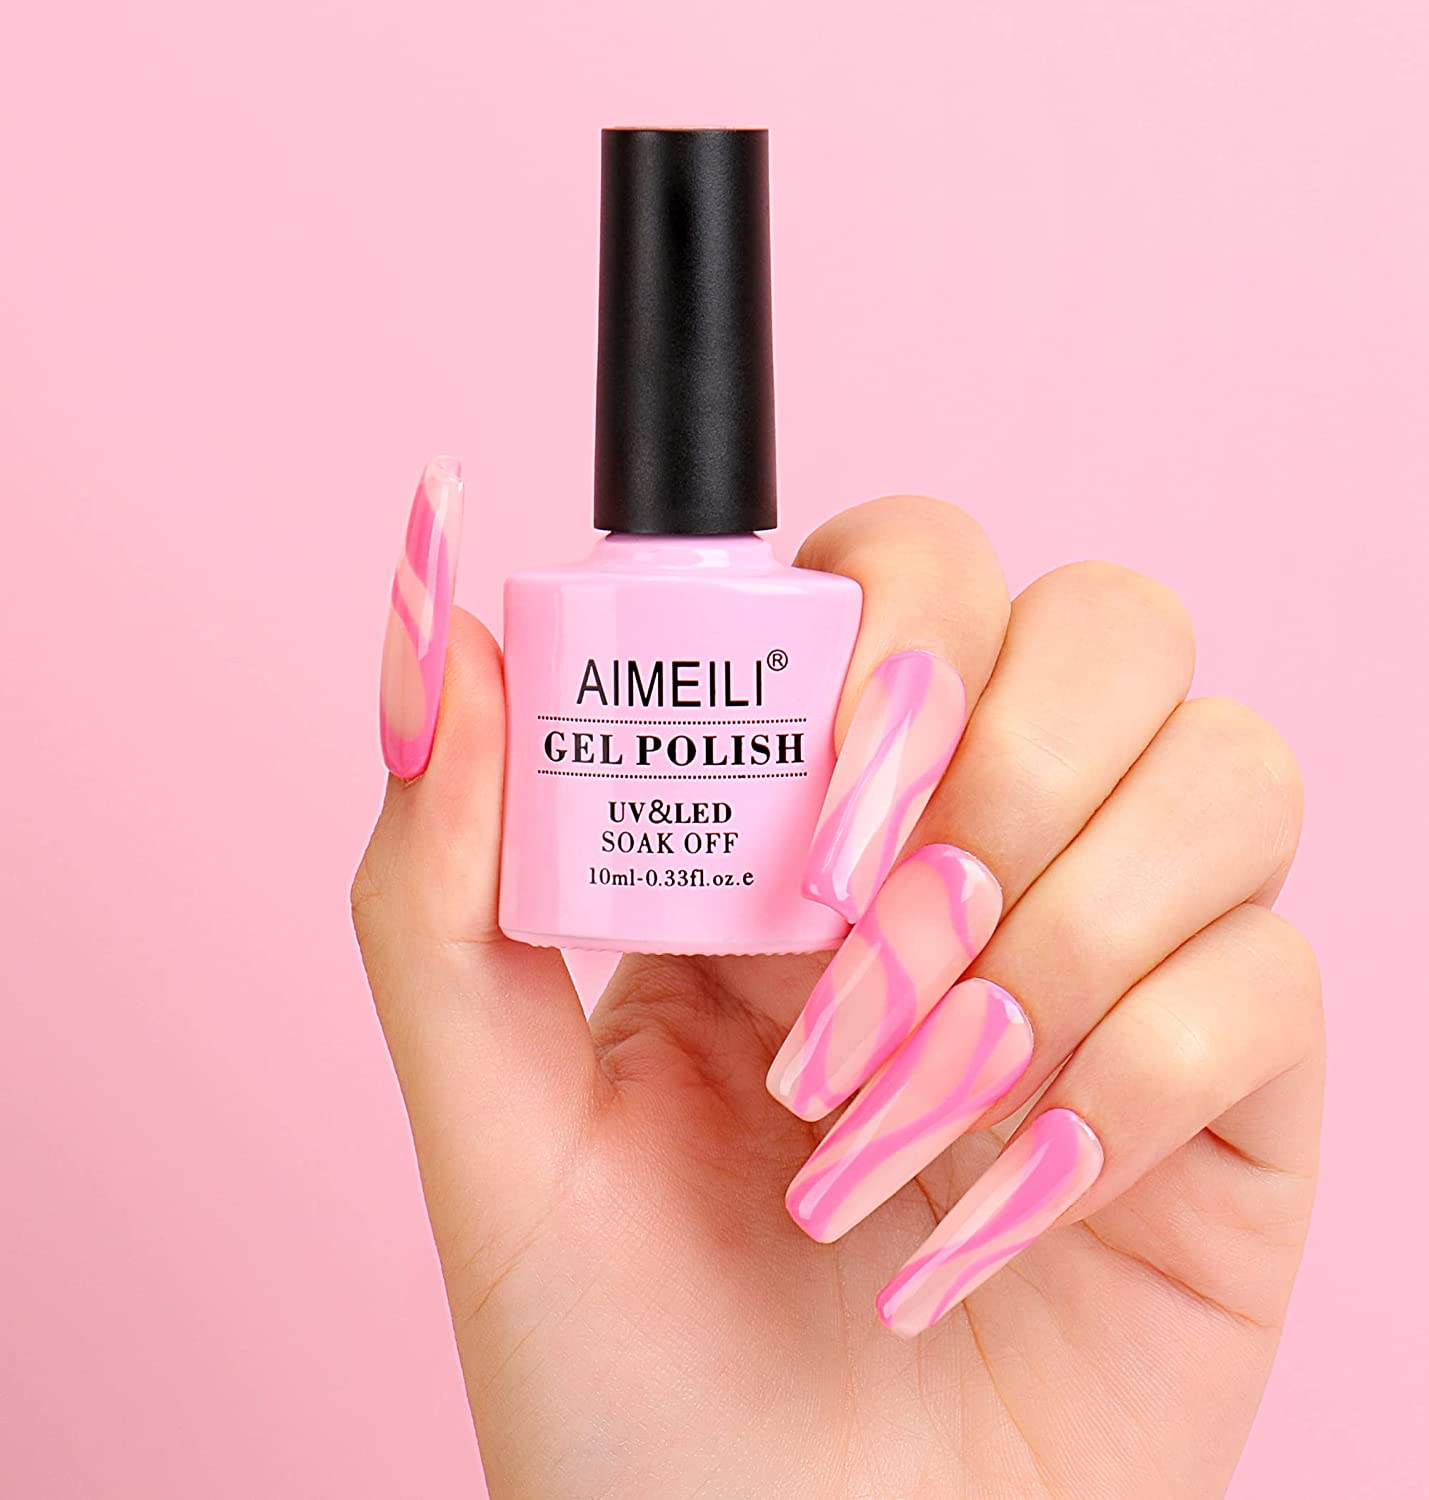 50 Hottest Summer Nail Colors to Try in 2022 - The Trend Spotter